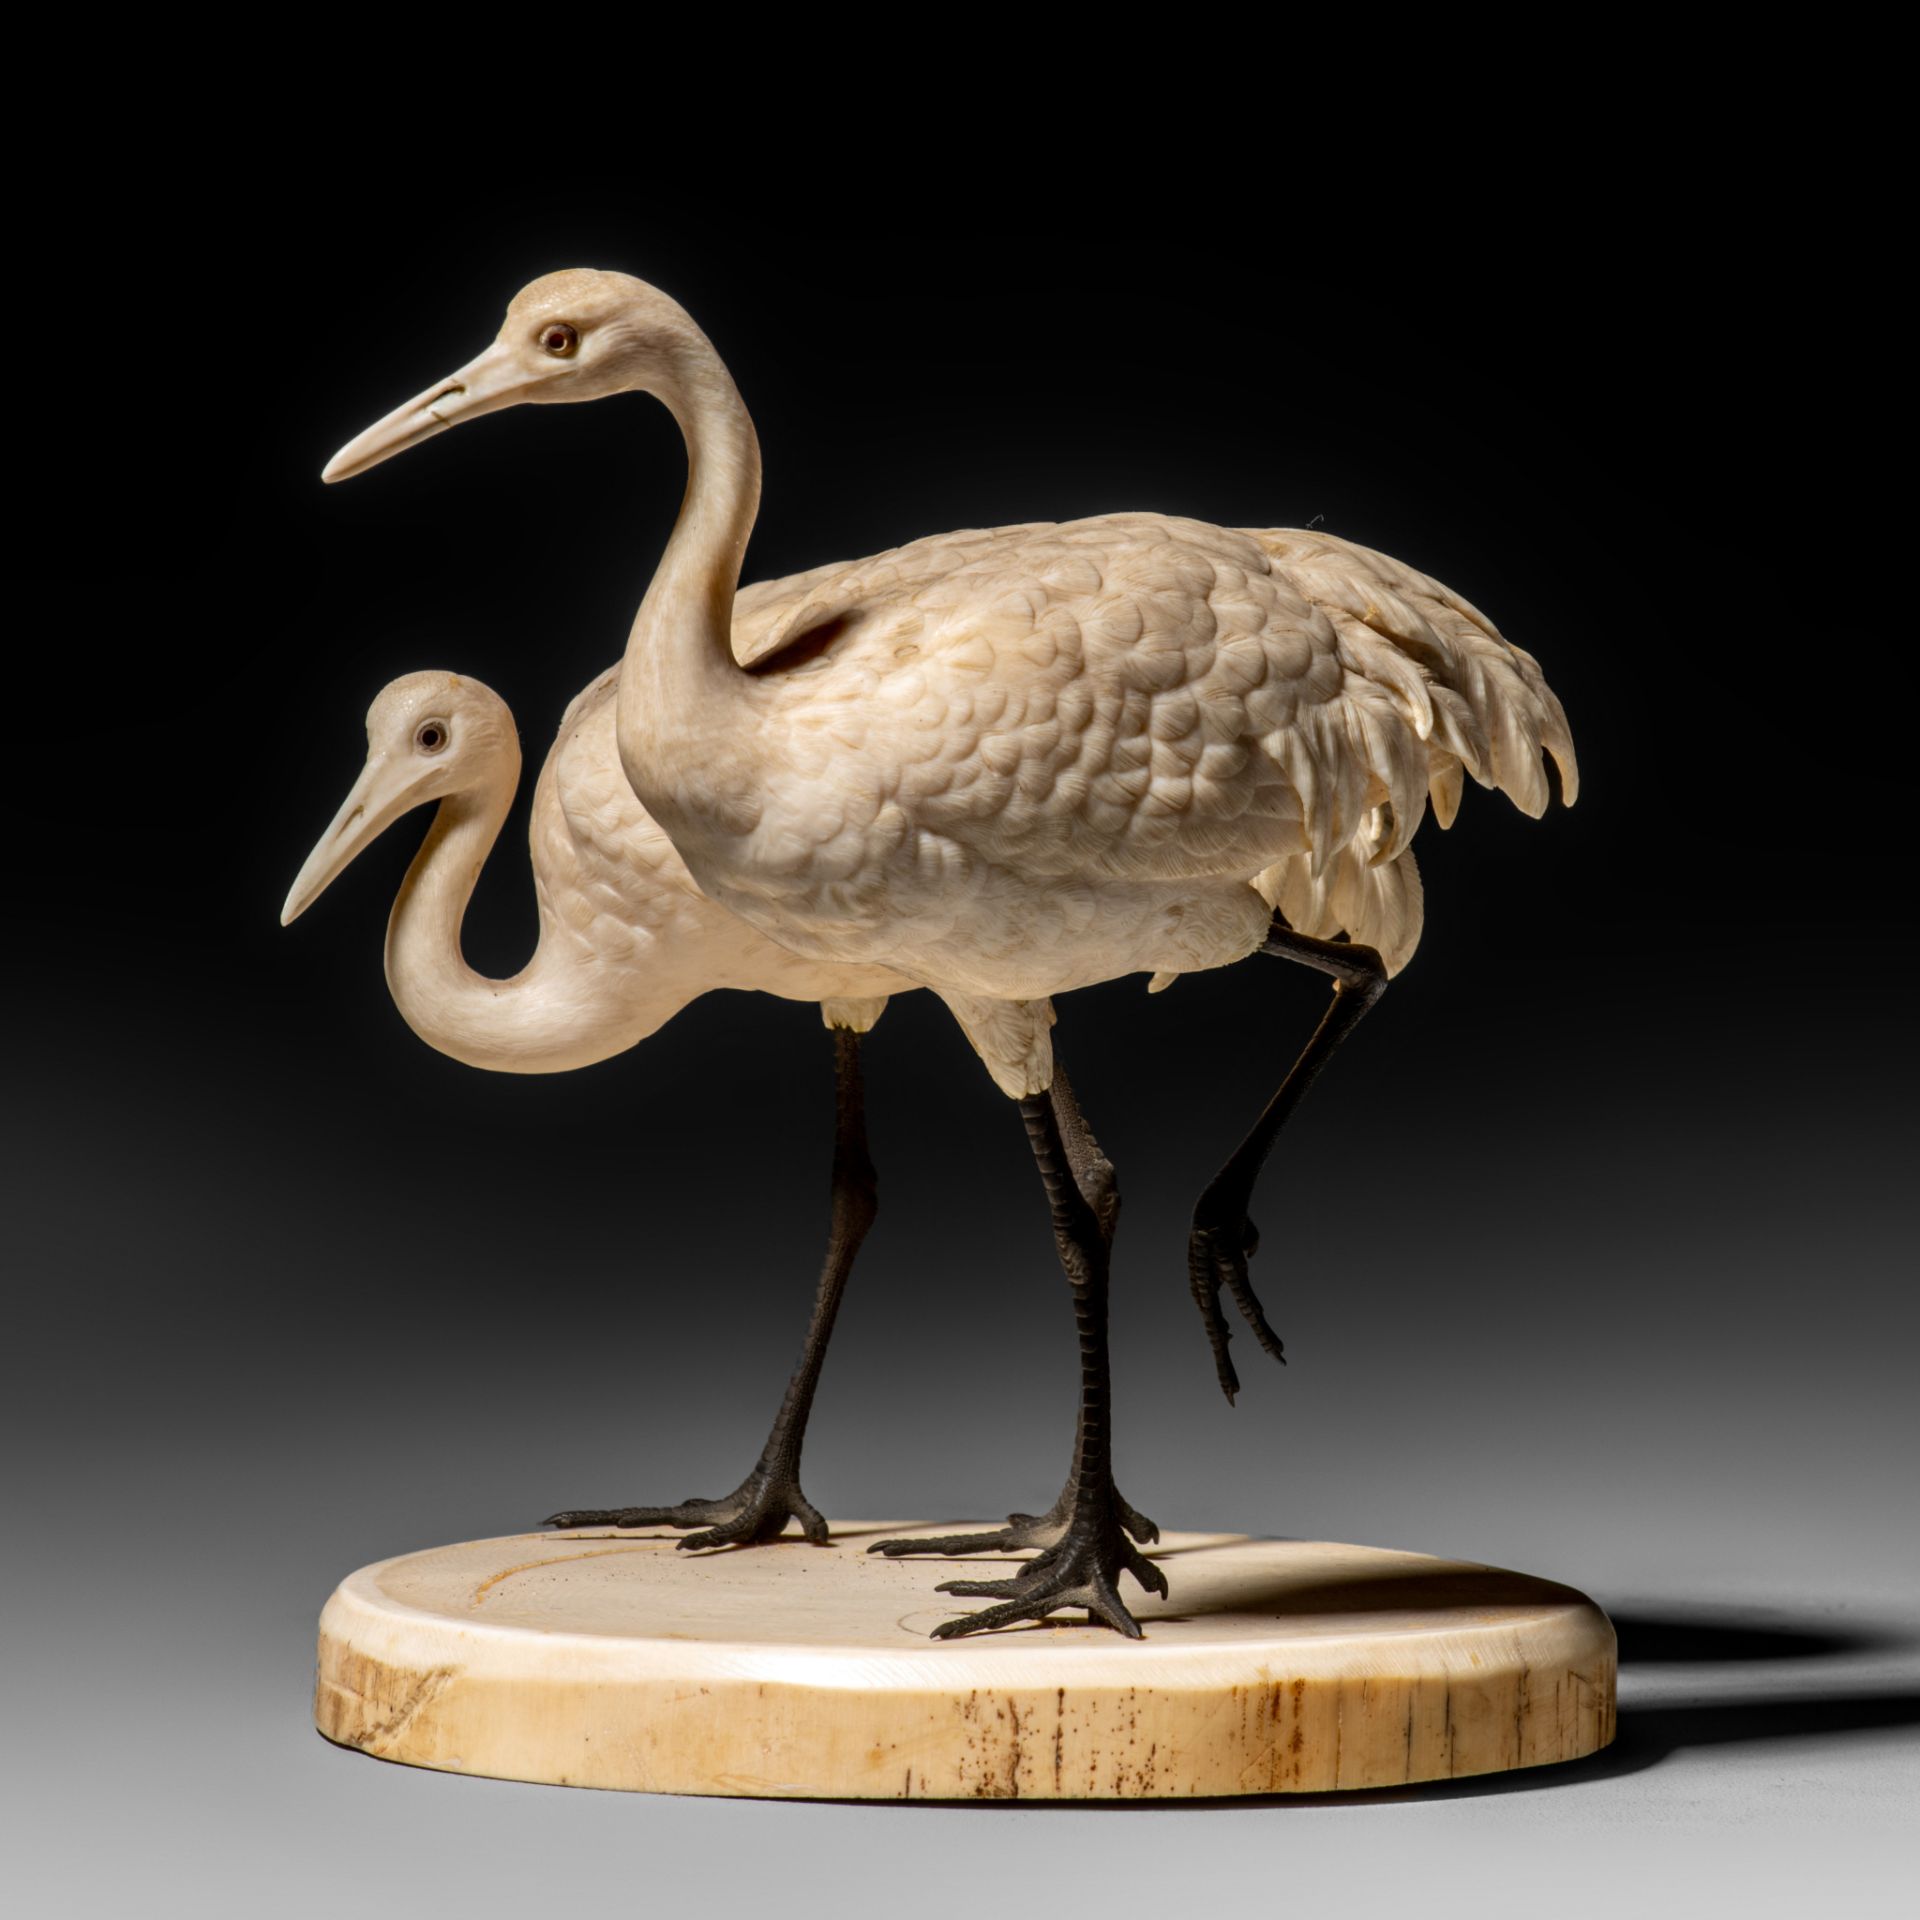 A Japanese Meiji-period ivory okimono depicting a pair of cranes, H 14 cm - 488 g (+)